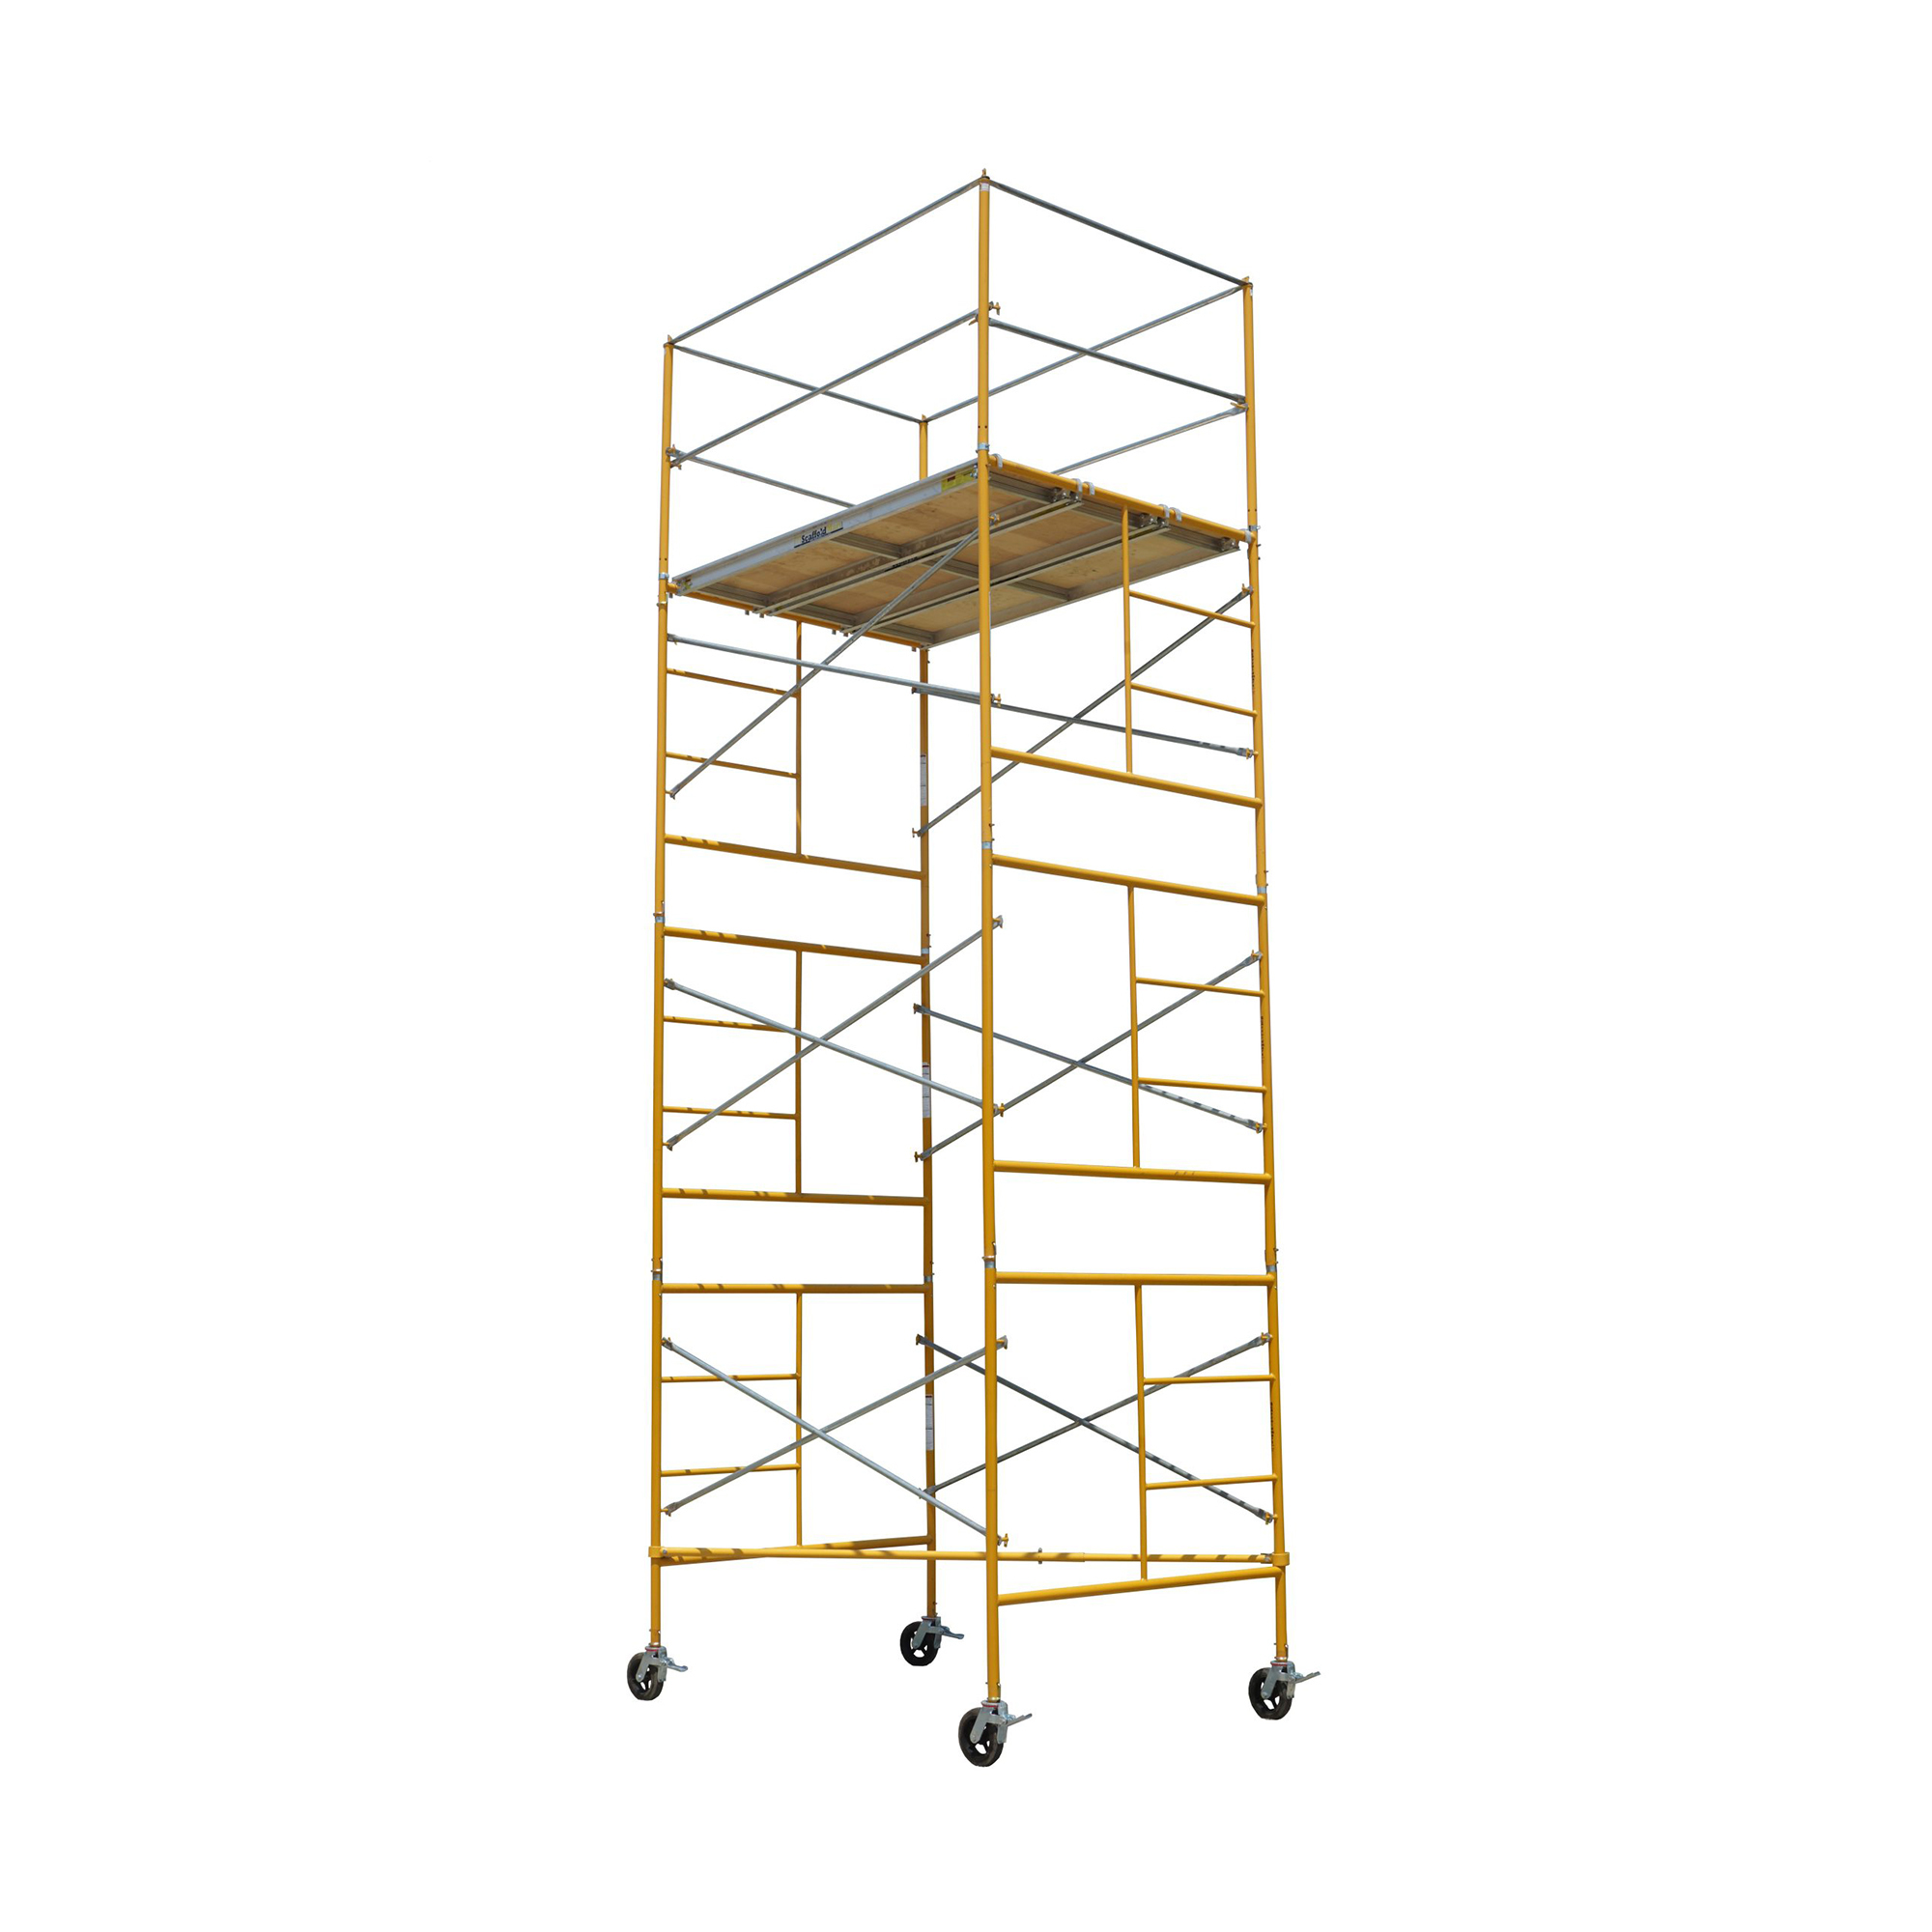 ScaffoldMart, 16ft. Rolling Tower Package, Capacity 2100 lb, Frame Material Steel, Max. Platform Height 16 ft, Model BB16R